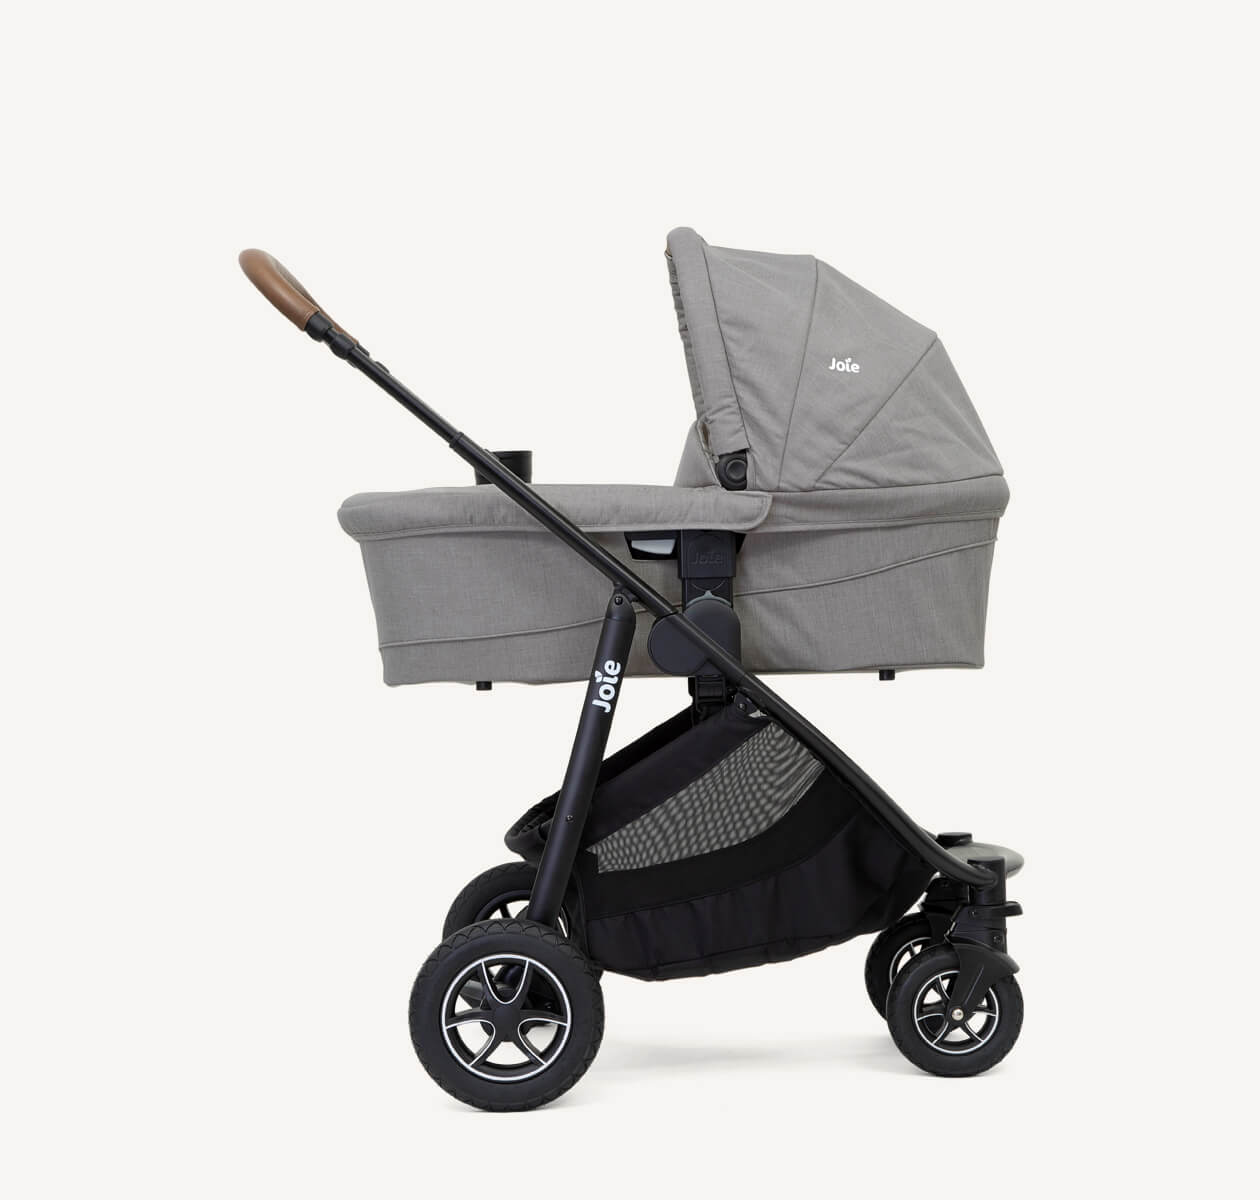 A grey stroller with a wooden handle.